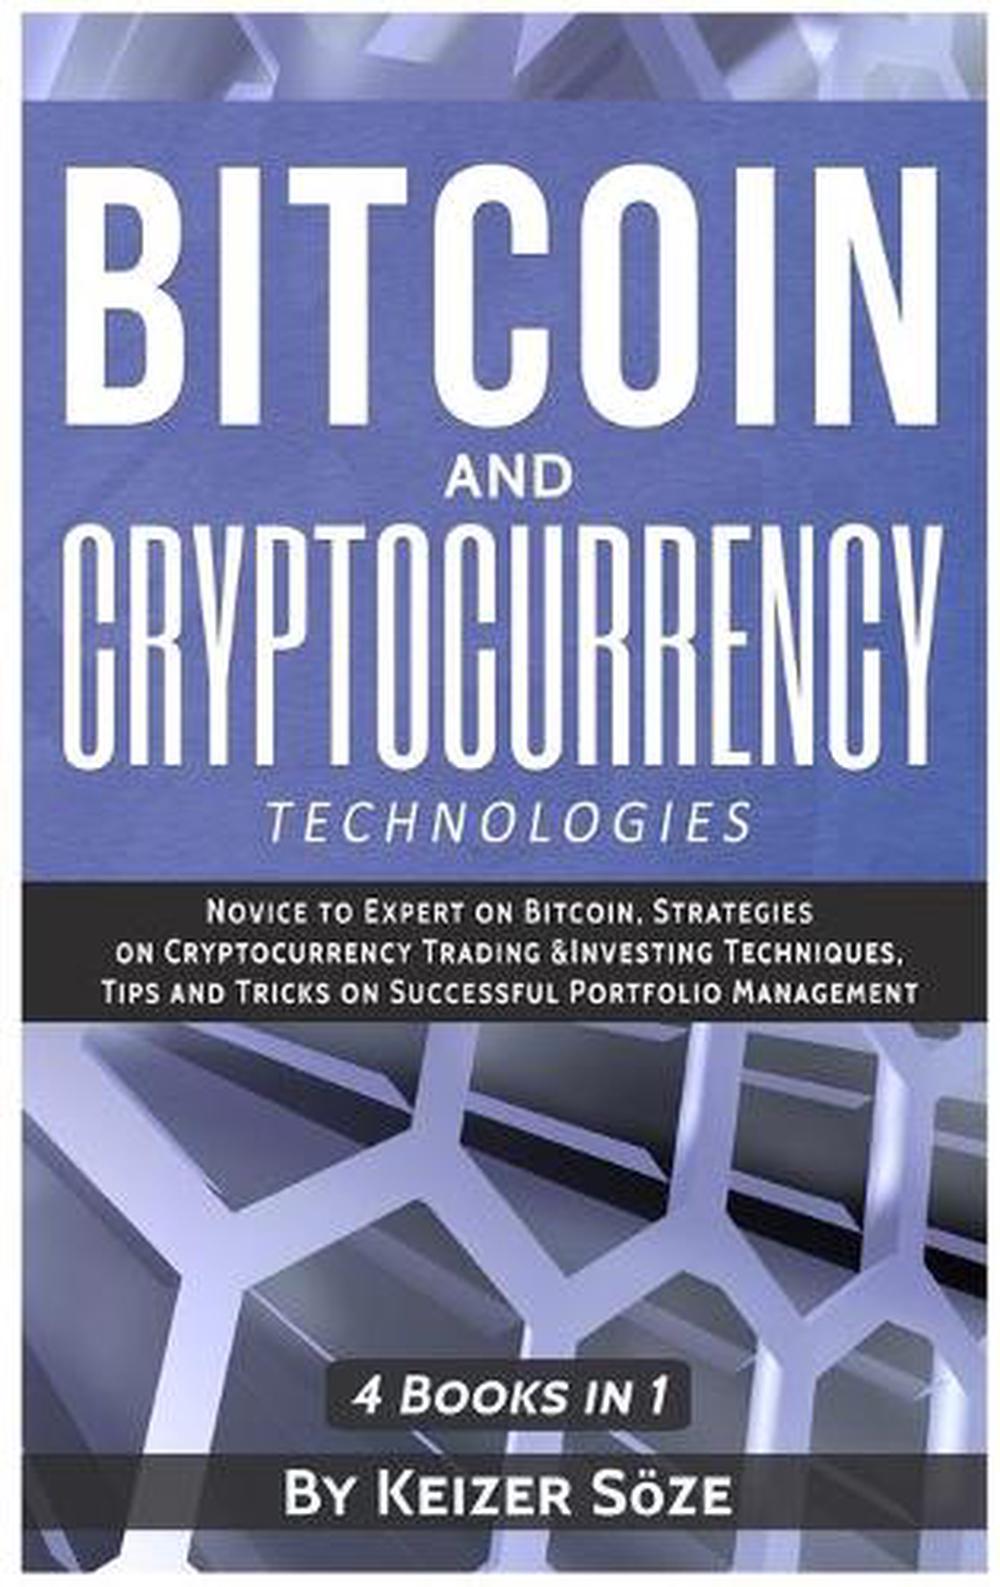 bitcoin and cryptocurrency technologies a comprehensive introduction epub